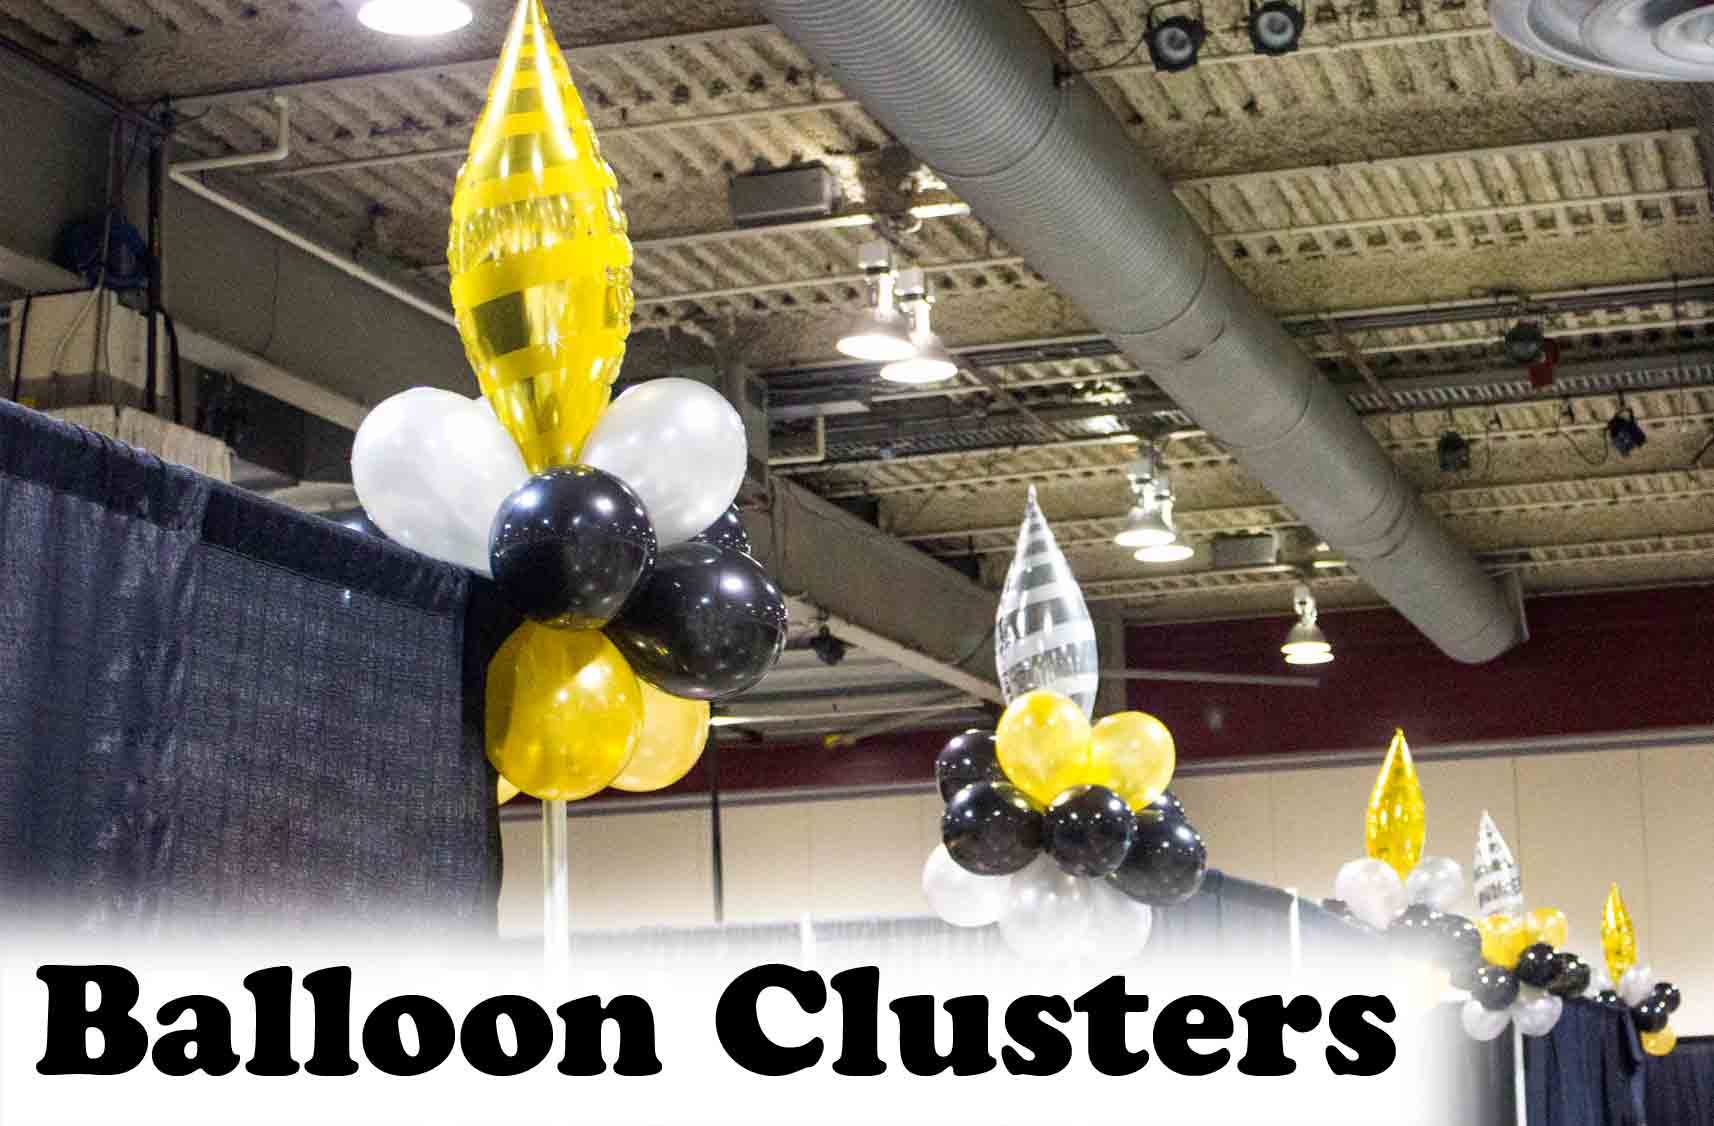 Balloon clusters